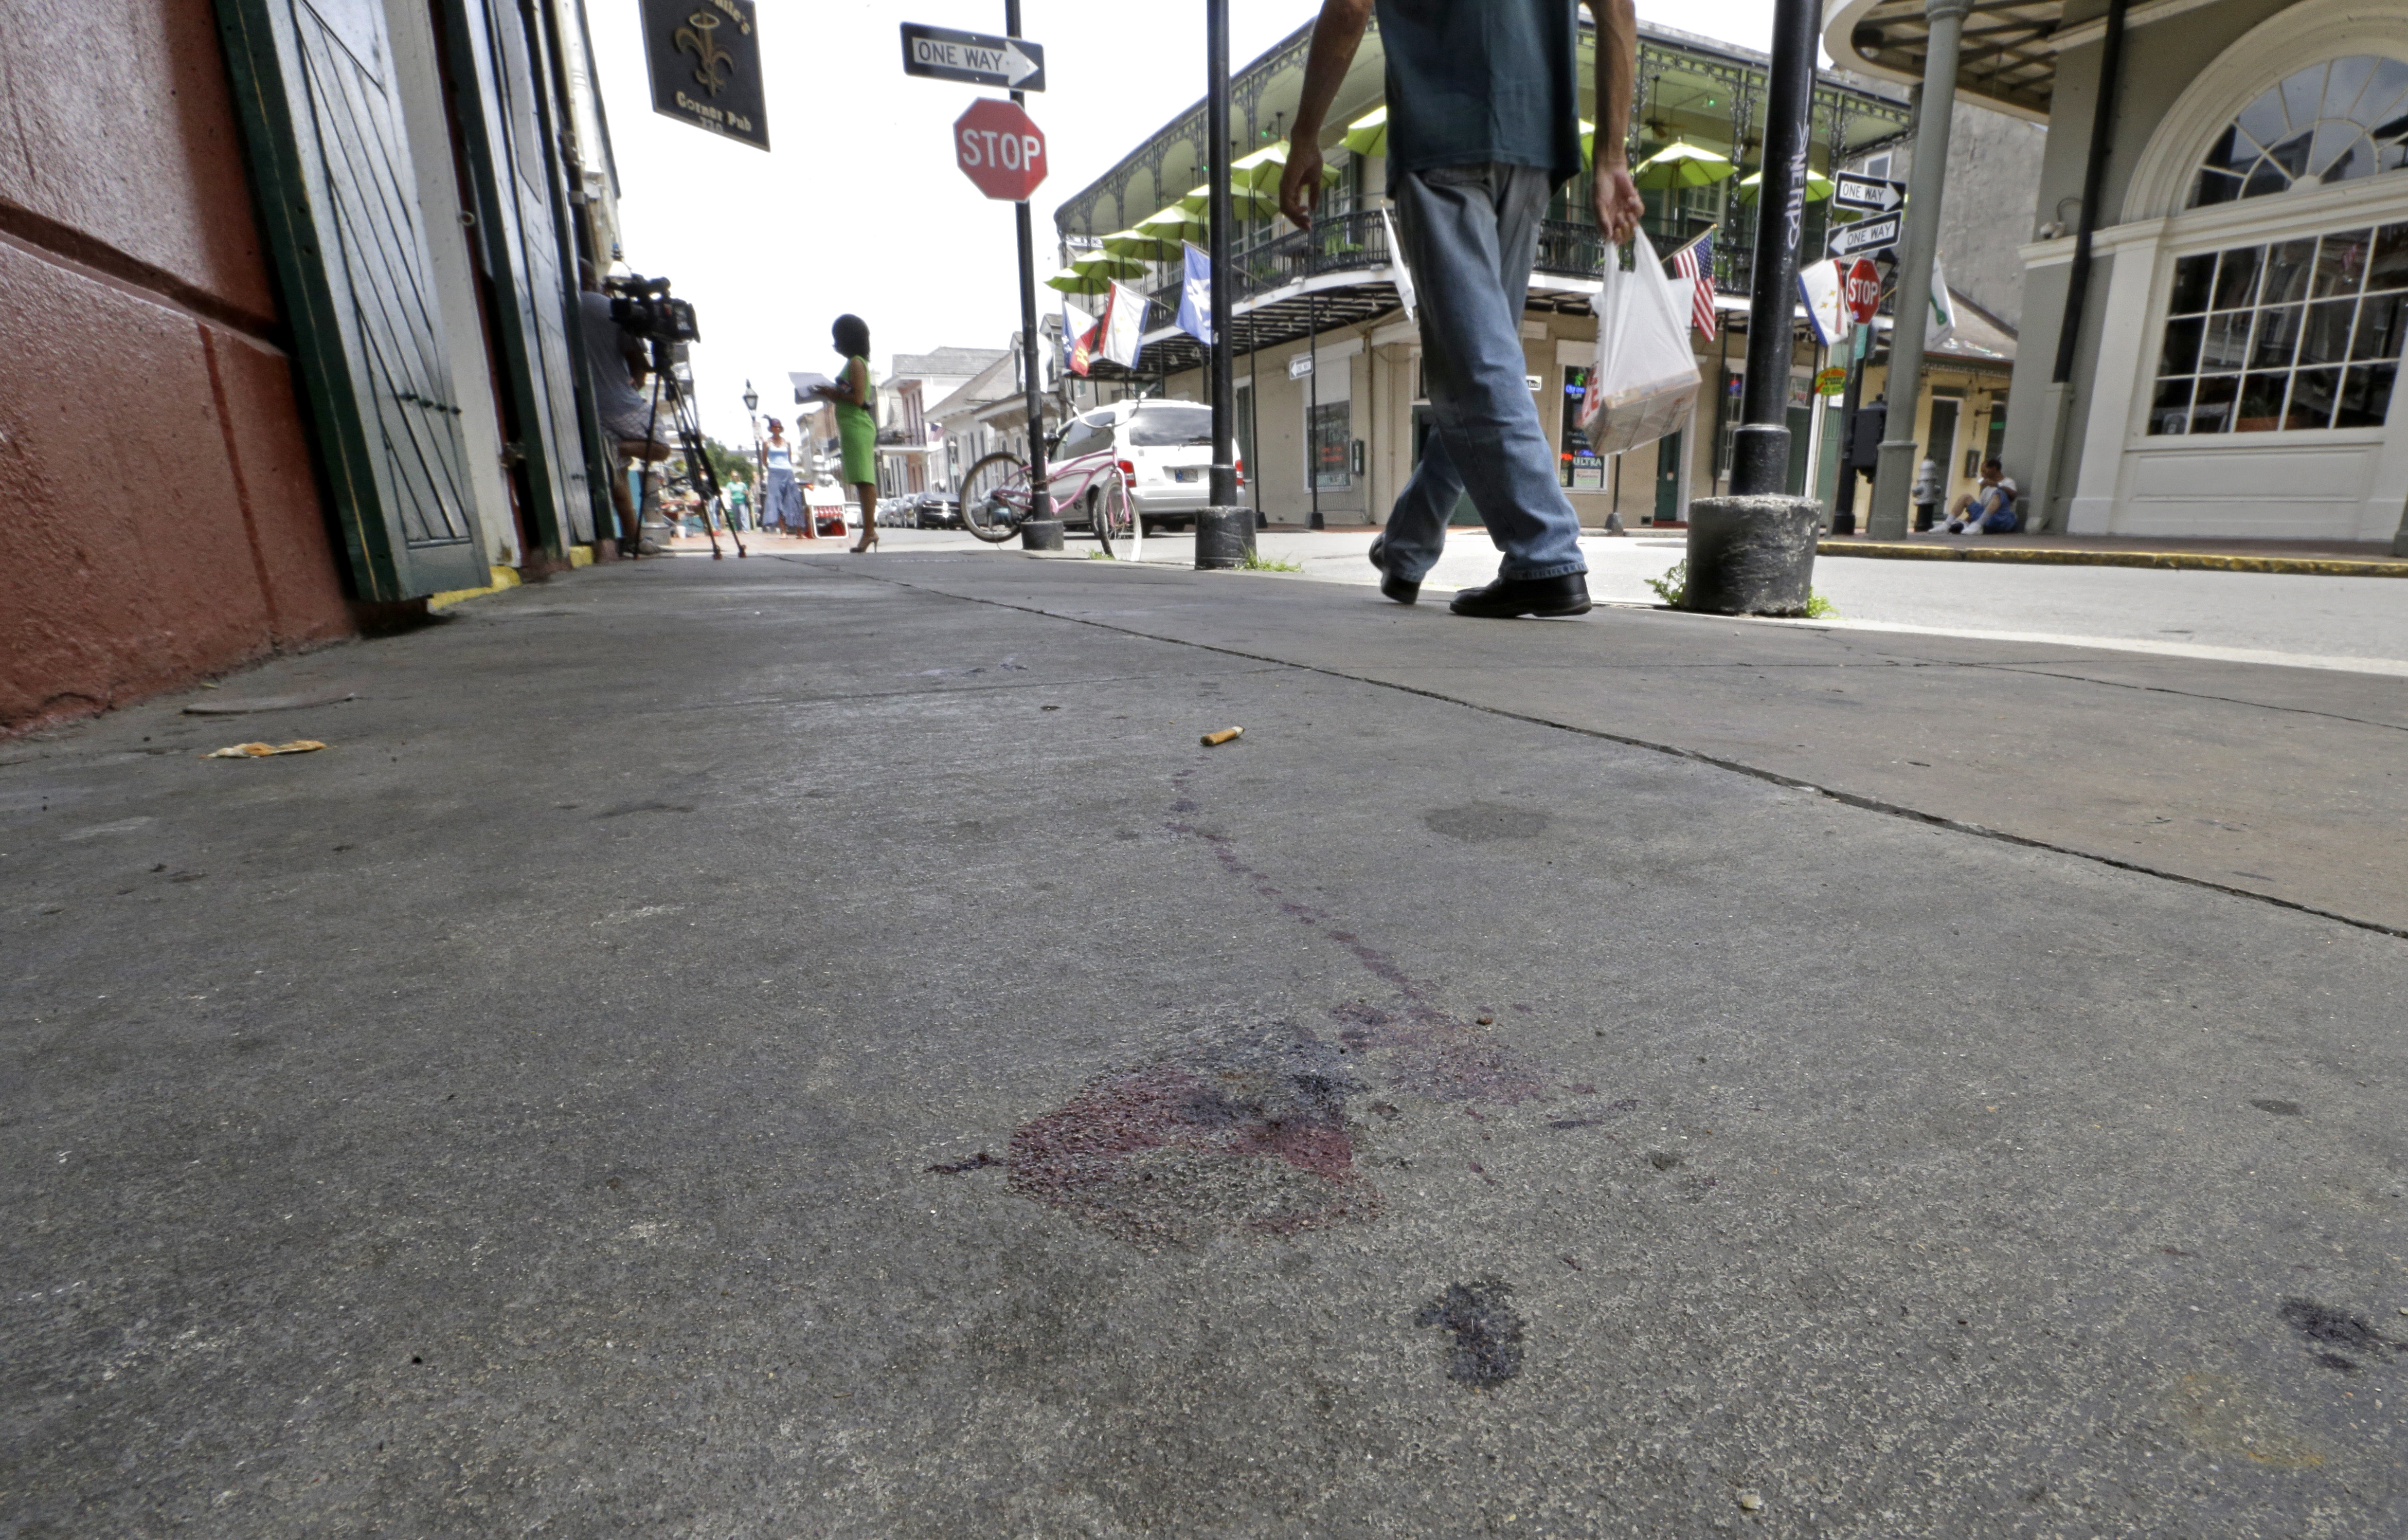 Blood stains are seen on the sidewalk at the scene of a shooting that happened early Sunday morning, June 29, 2014, on Bourbon Street in New Orleans. Nine people were injured, one seriously, according to New Orleans Police. (AP Photo/Gerald Herbert) (Gerald Herbert&mdash;AP)